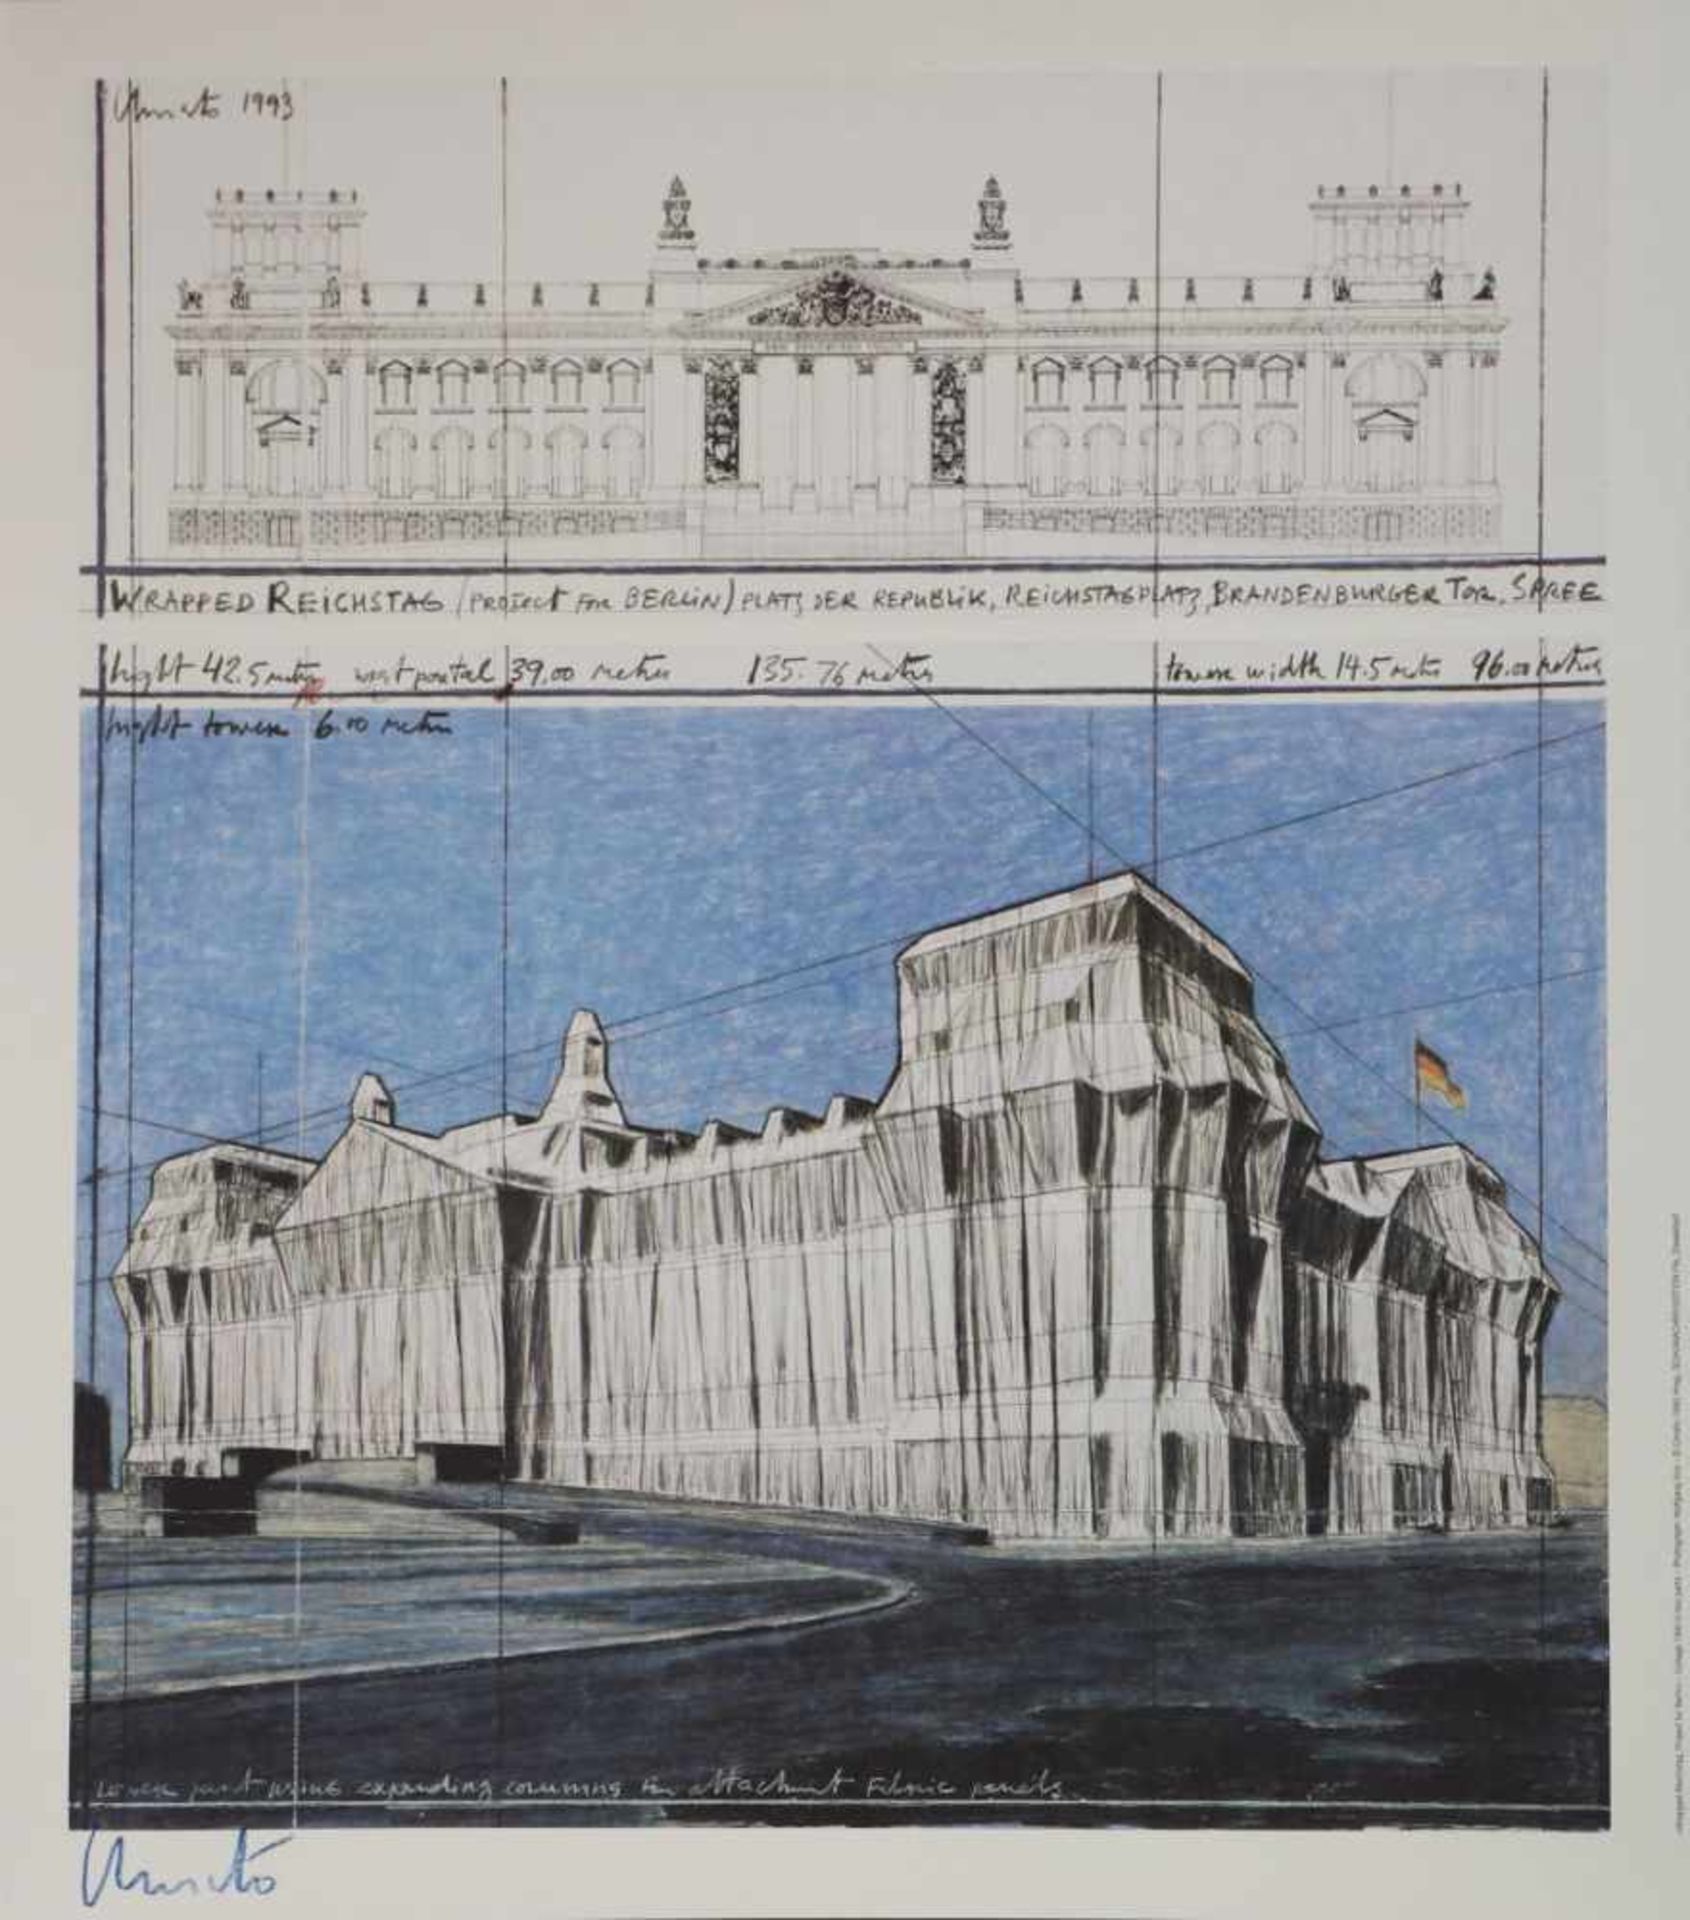 CHRISTO (1935 Gabrowo)Plakat (Farboffset), ¨Wrapped Reichstag. Project for Berlin¨, unten links